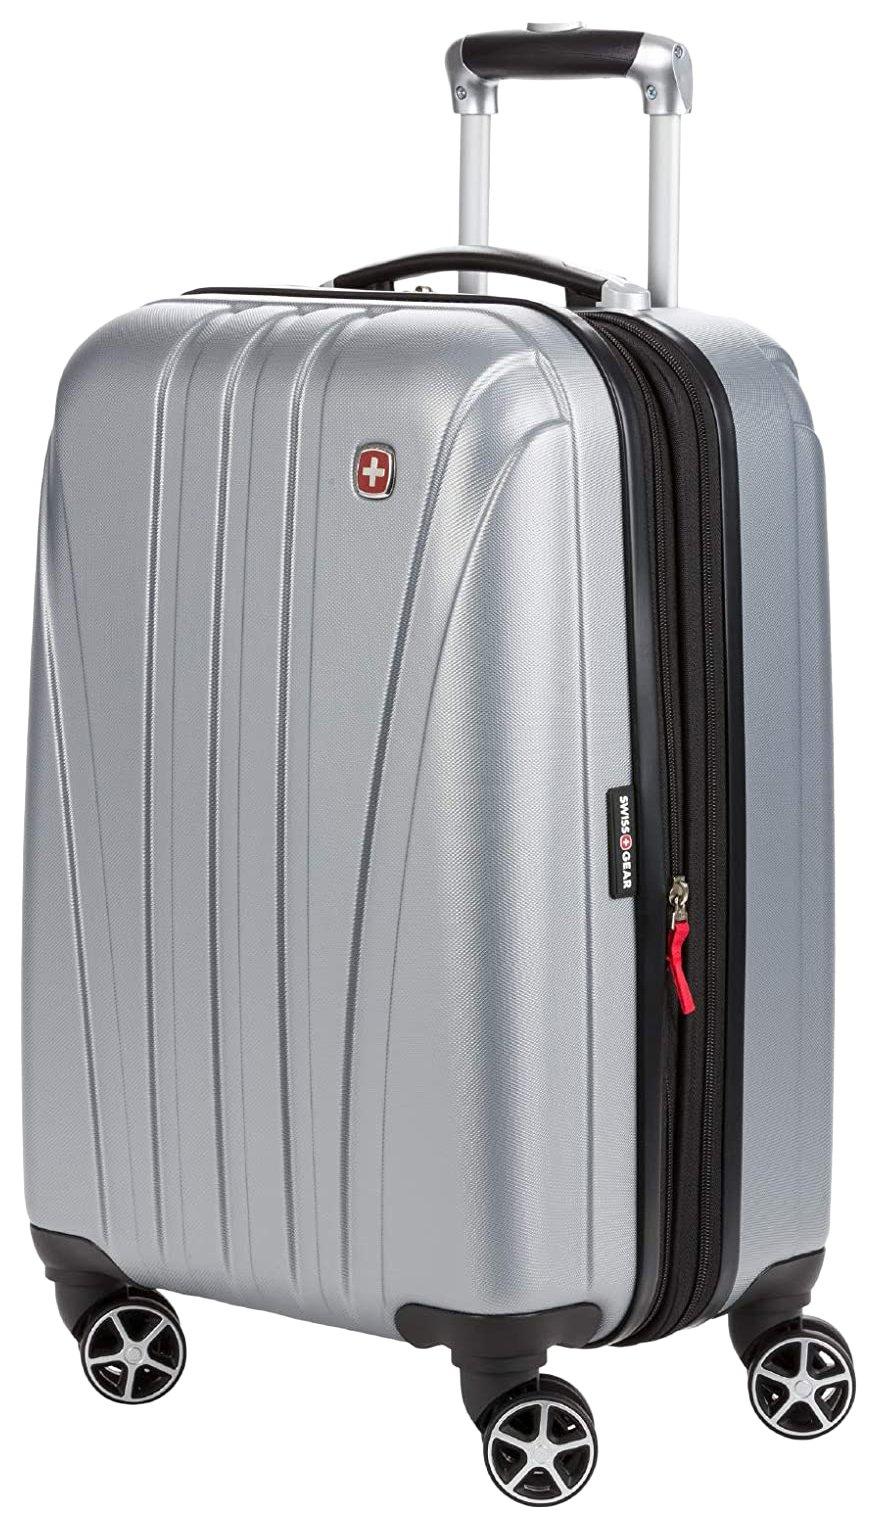 Swiss Gear 20in Expandable Hardside Spinner Luggage